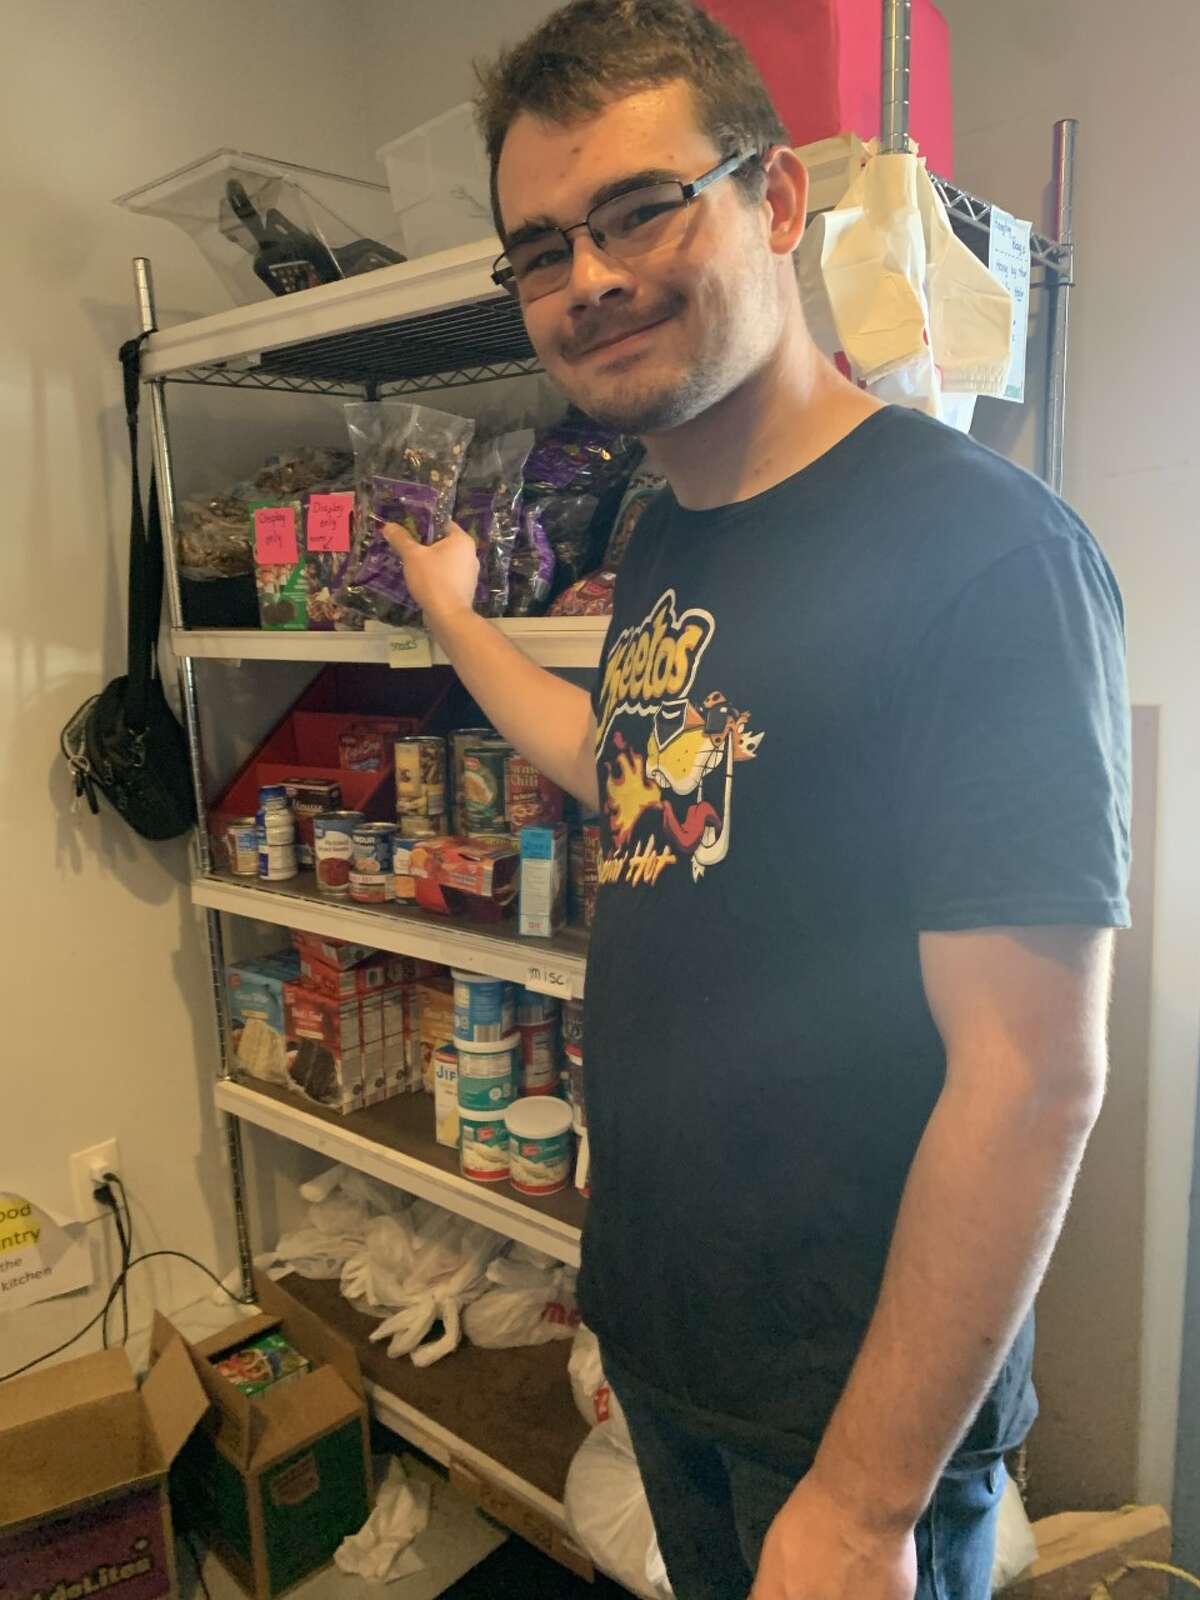 Manna Pantry in Big Rapids offers opportunities for special needs students to learn life and job skills through volunteering. volunteer Sean helps to repackage foods and shop for clients.